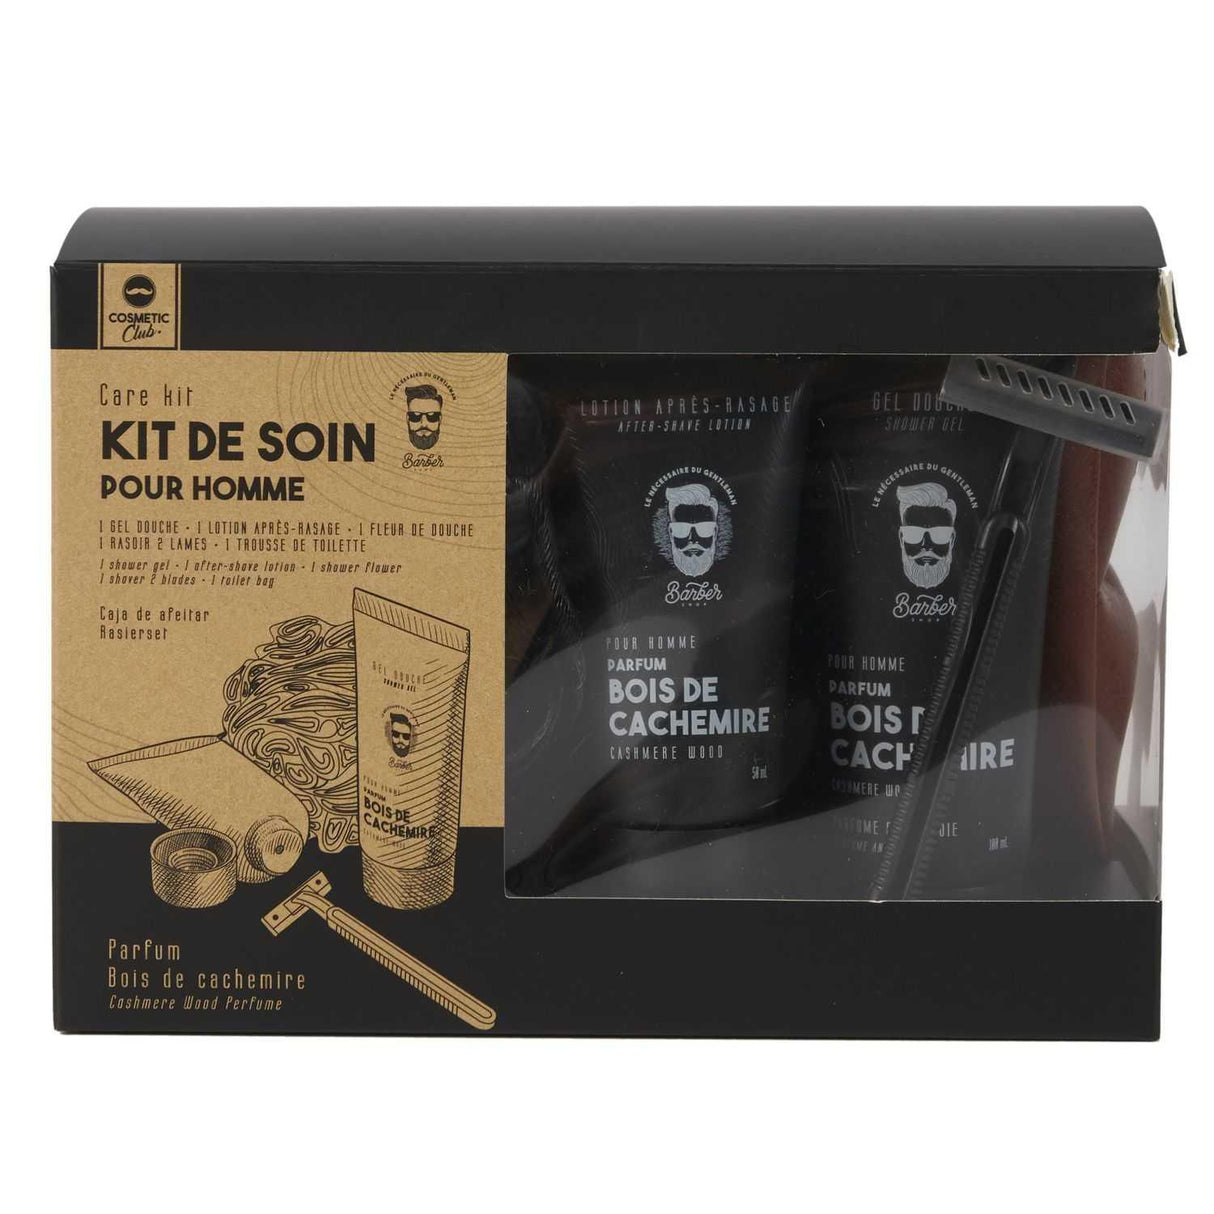 COSMETIC CLUB - COFFRET SOIN CORPS HOMME 5 ACCESSOIRES - STOCK4U GROUP